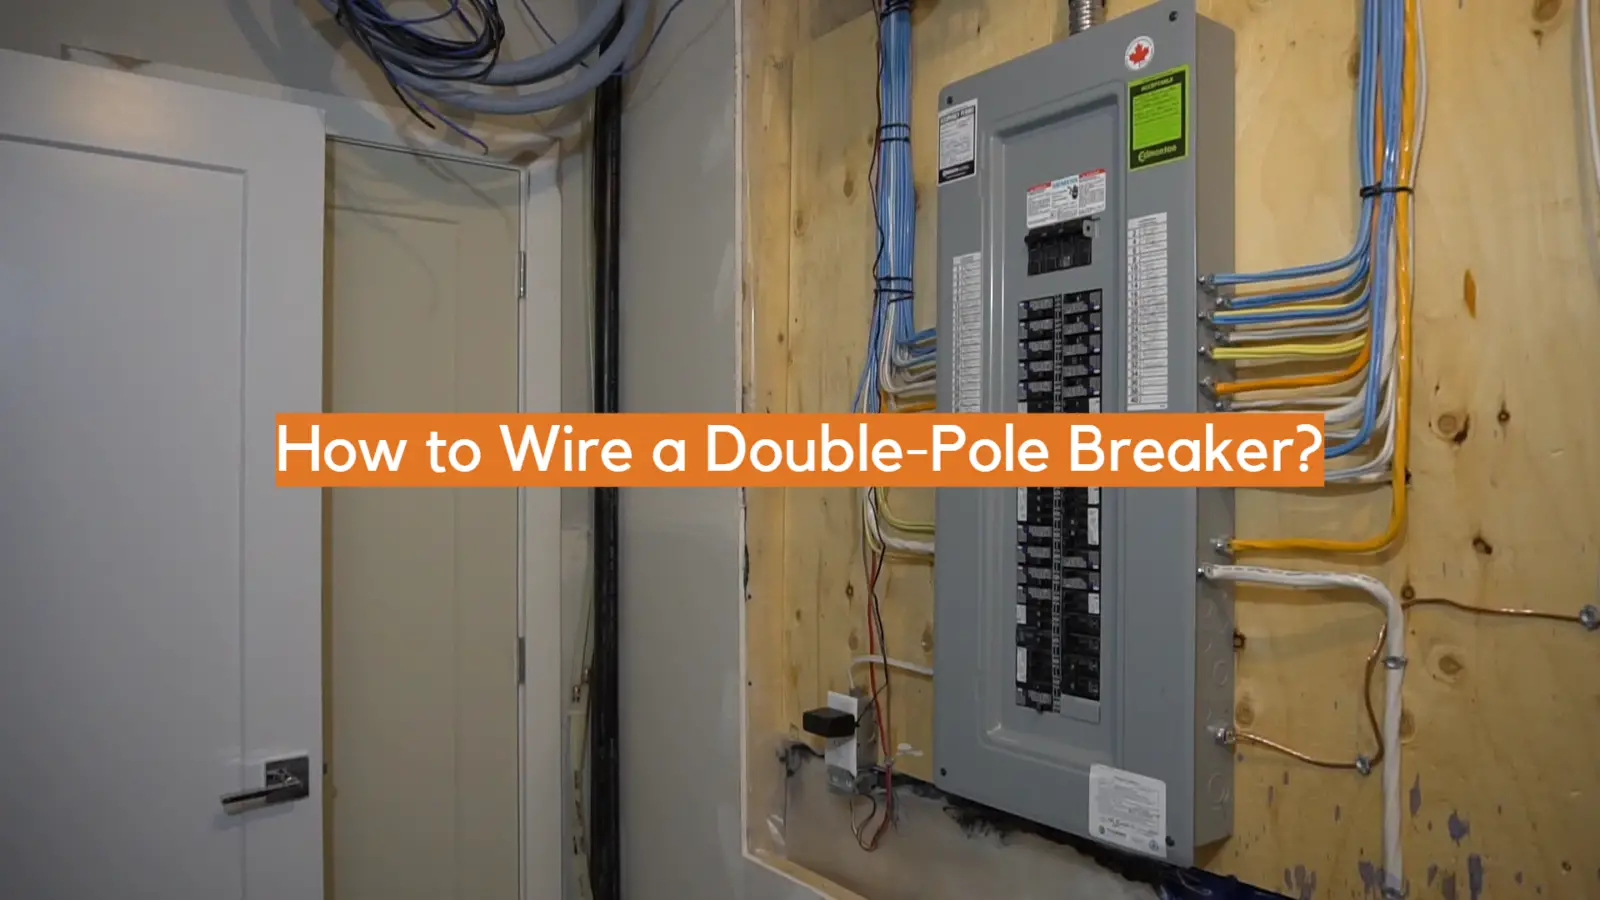 How to Wire a Double-Pole Breaker?